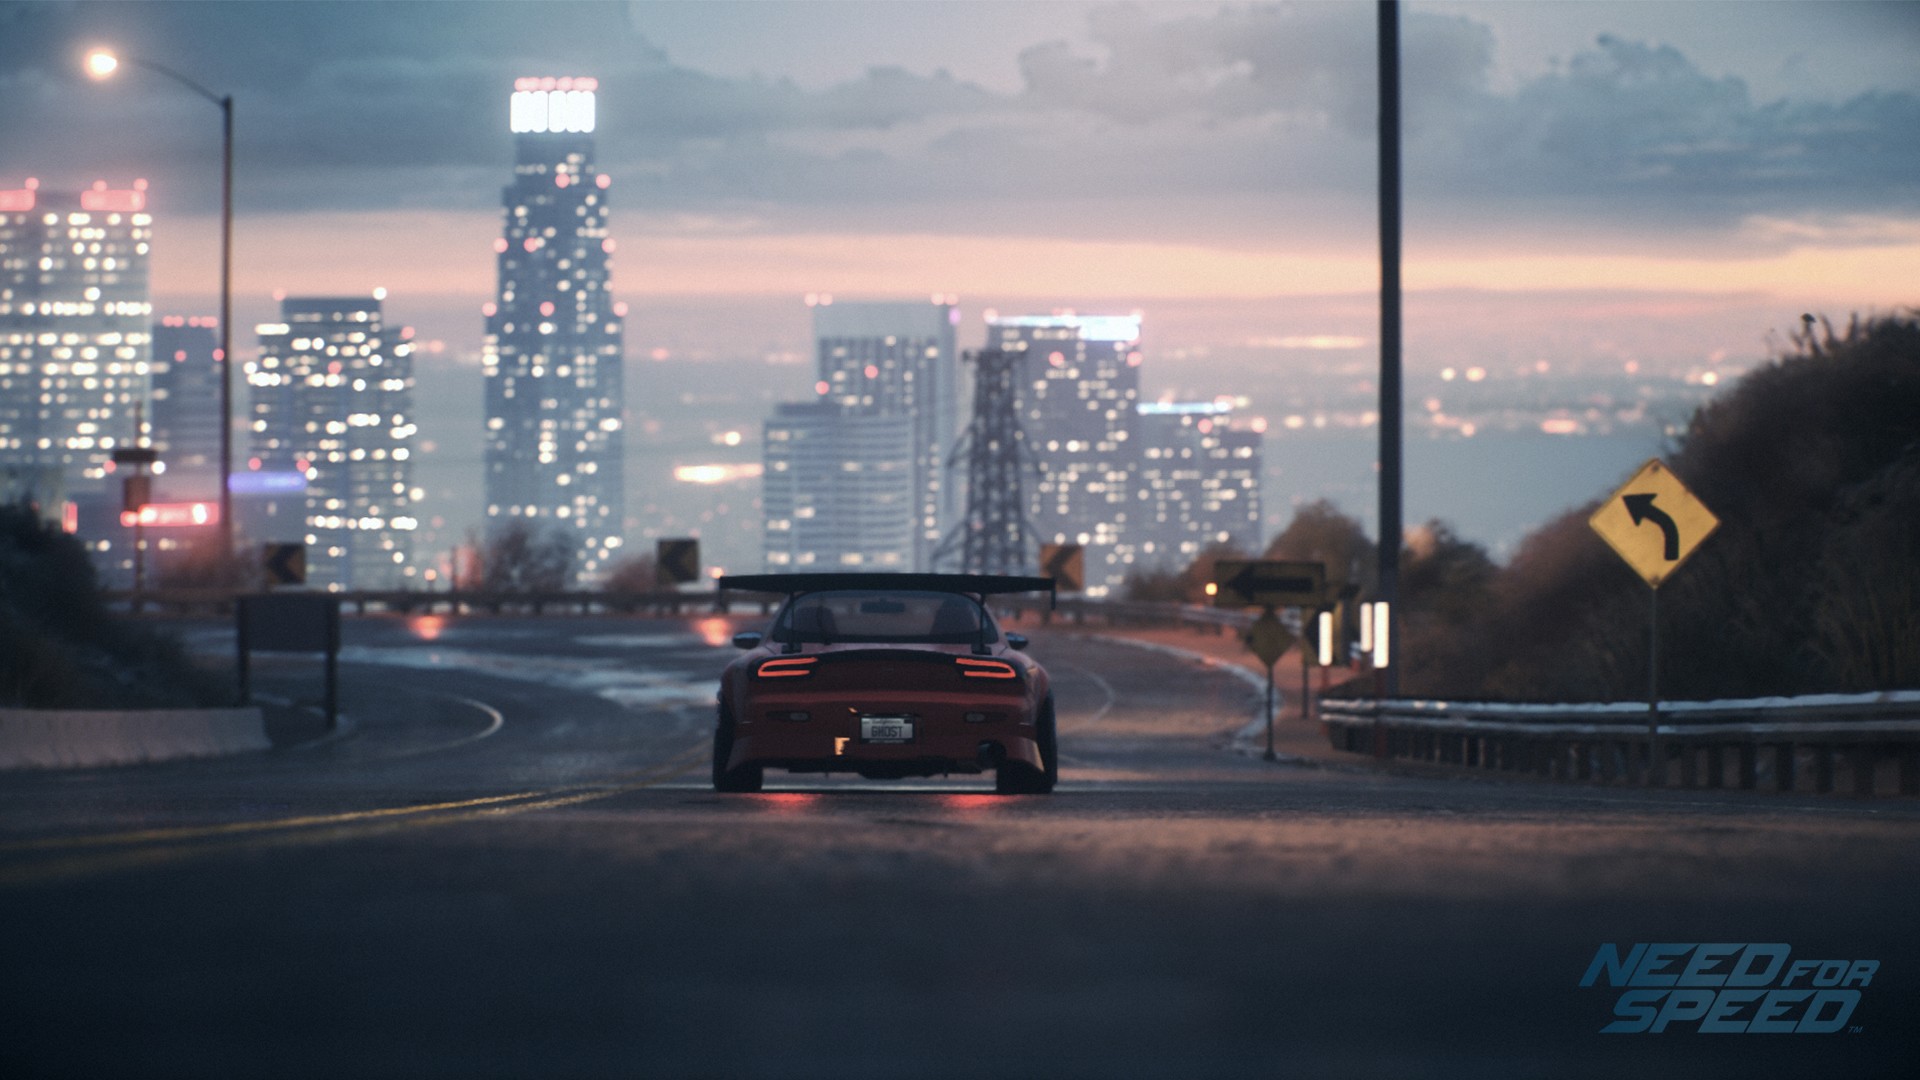 Need for Speed, Mazda rx7, Car Wallpaper